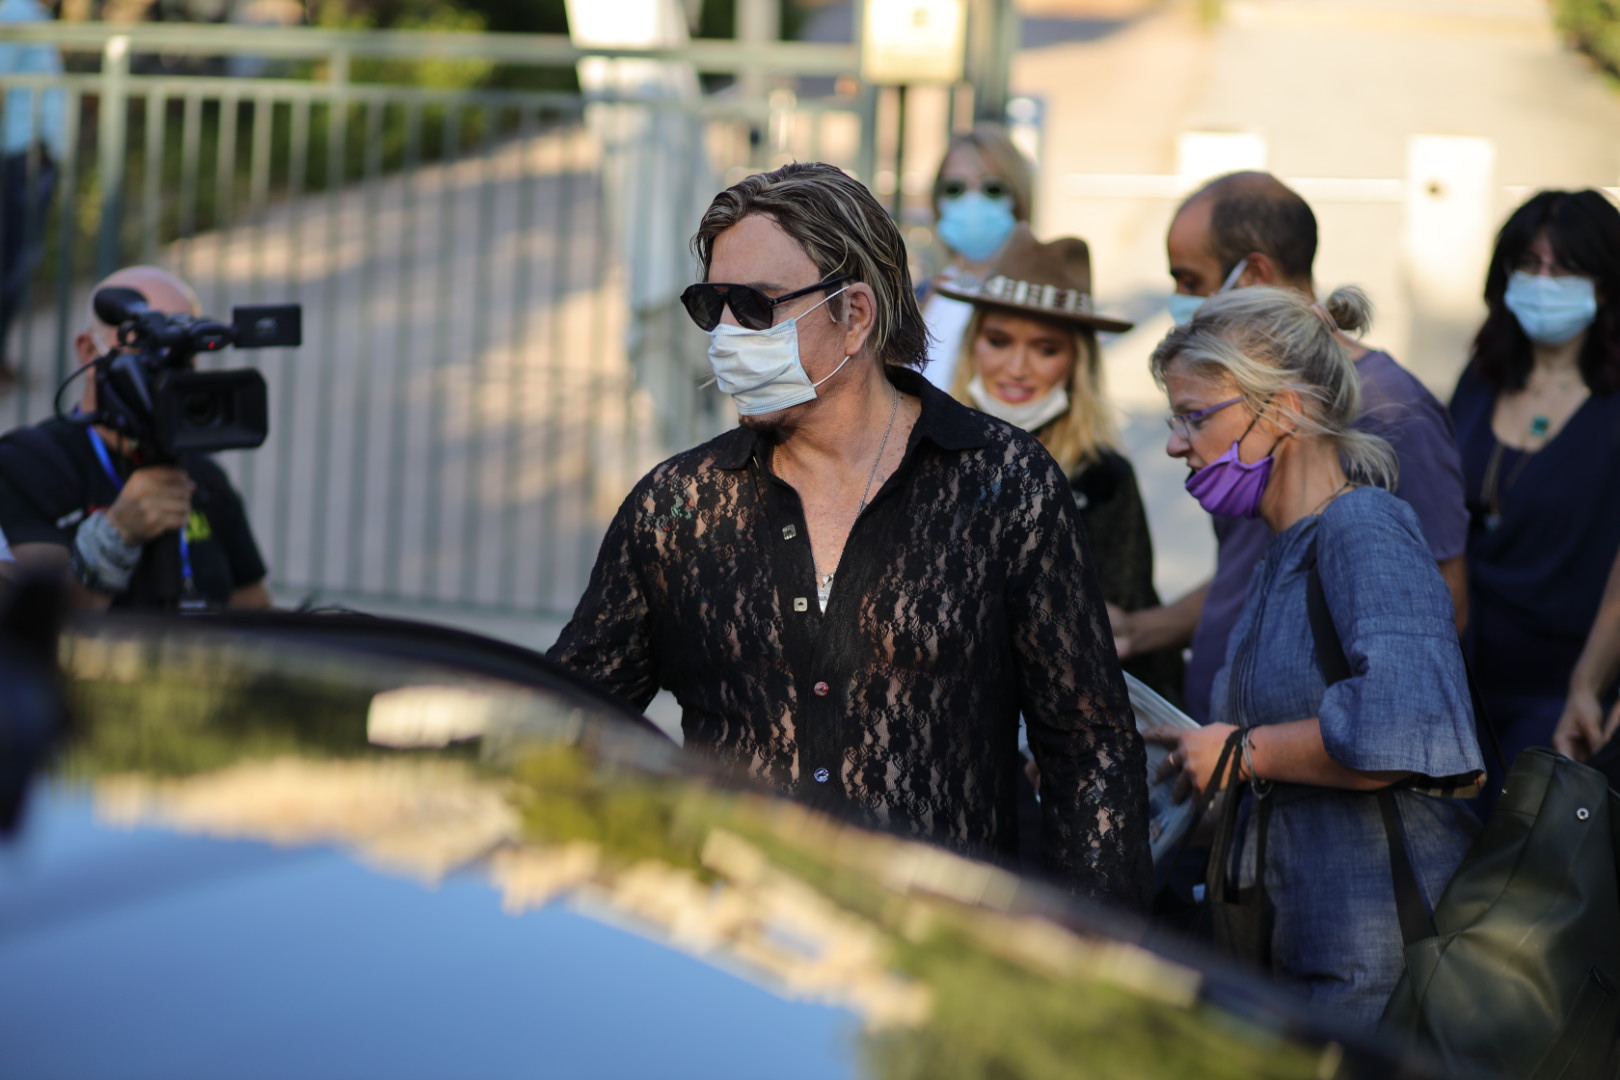 Mickey Rourke visiting the Acropolis on September 10, 2020 in Athens, Greece. | Source: Getty Images